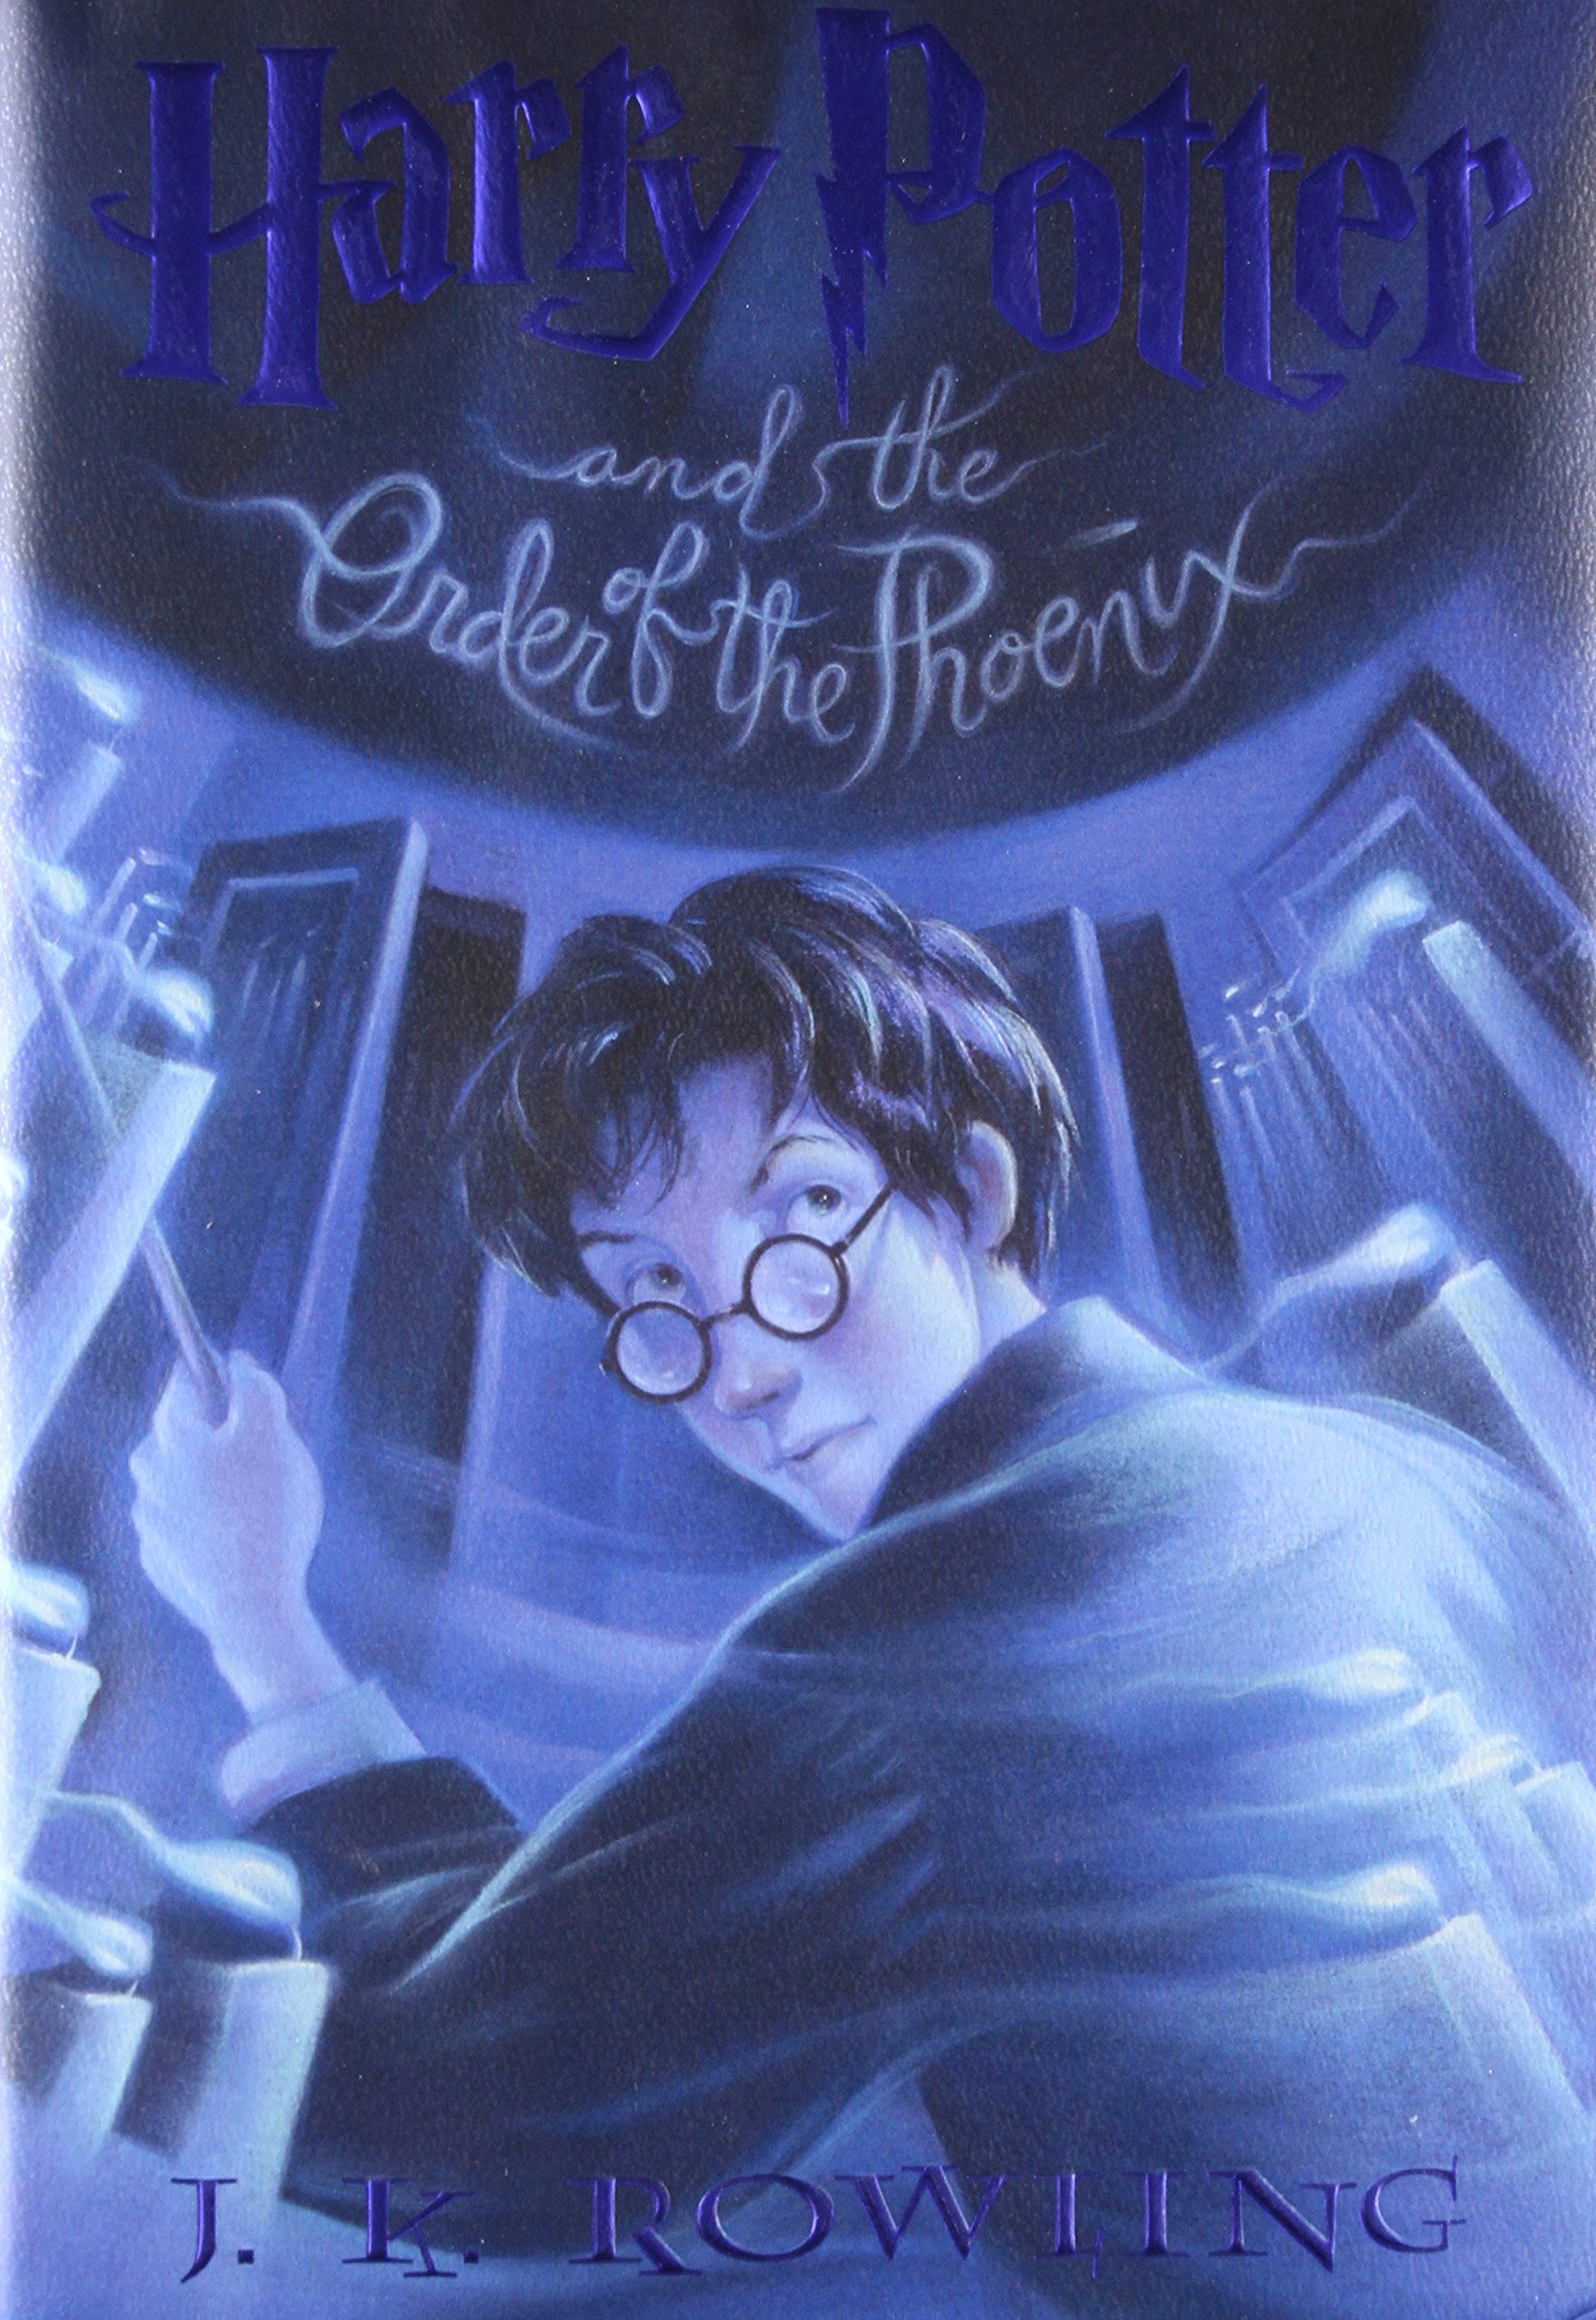 Harry Potter audiobook Part 5: Harry Potter and the Order of the Phoenix